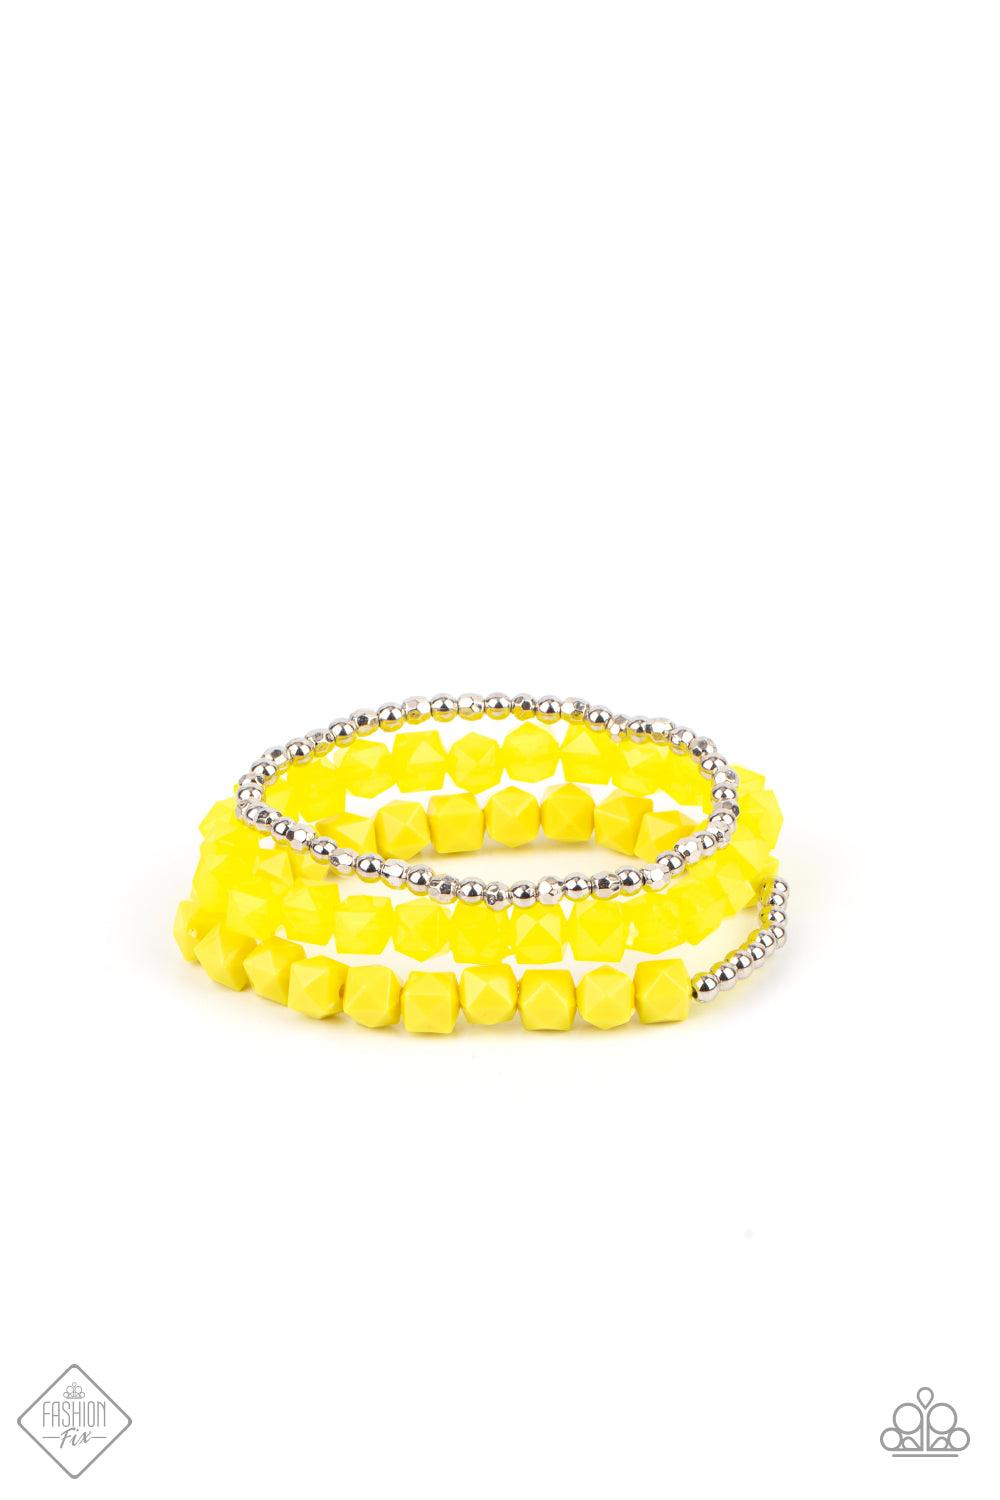 Paparazzi Accessories Vacay Vagabond - Yellow Infused with a strand of round and faceted silver beads, faceted rows of solid and opaque Illuminating cube beads are threaded along stretchy bands, wrapping around the wrist for an edgy pop of color. Sold as